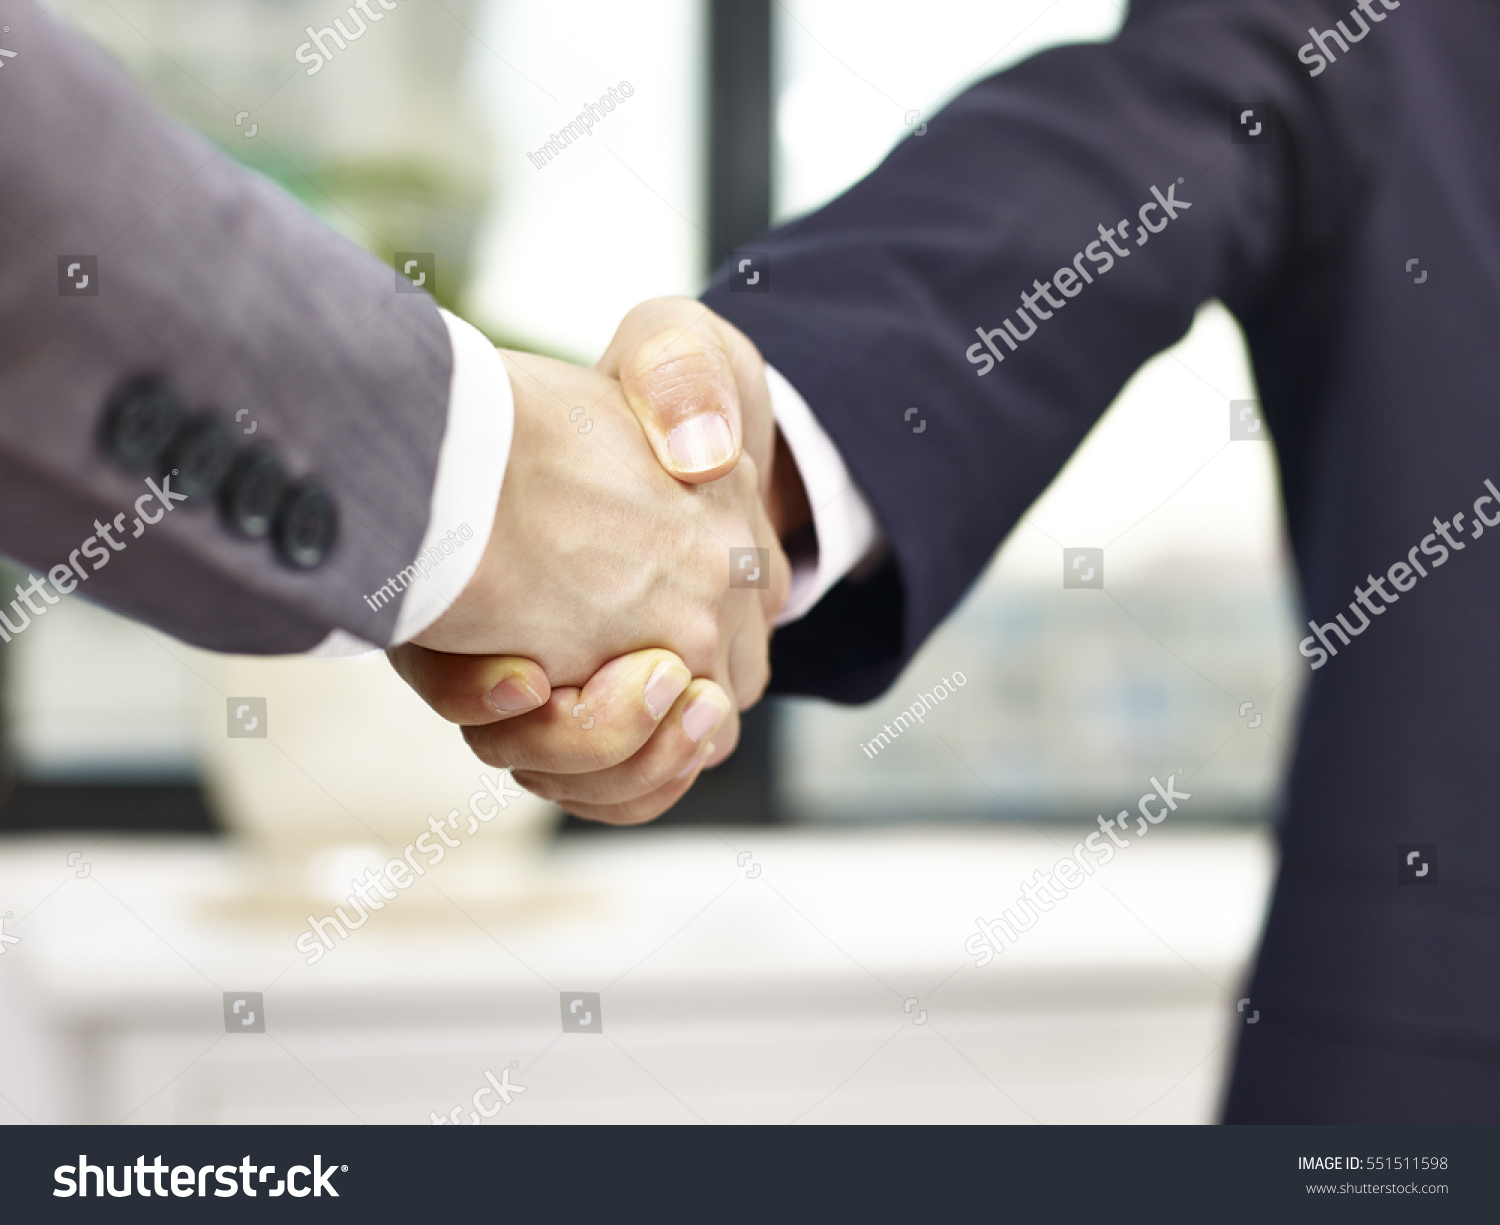 close-up, low angle view of a firm handshake in office by two asian businessmen. #551511598